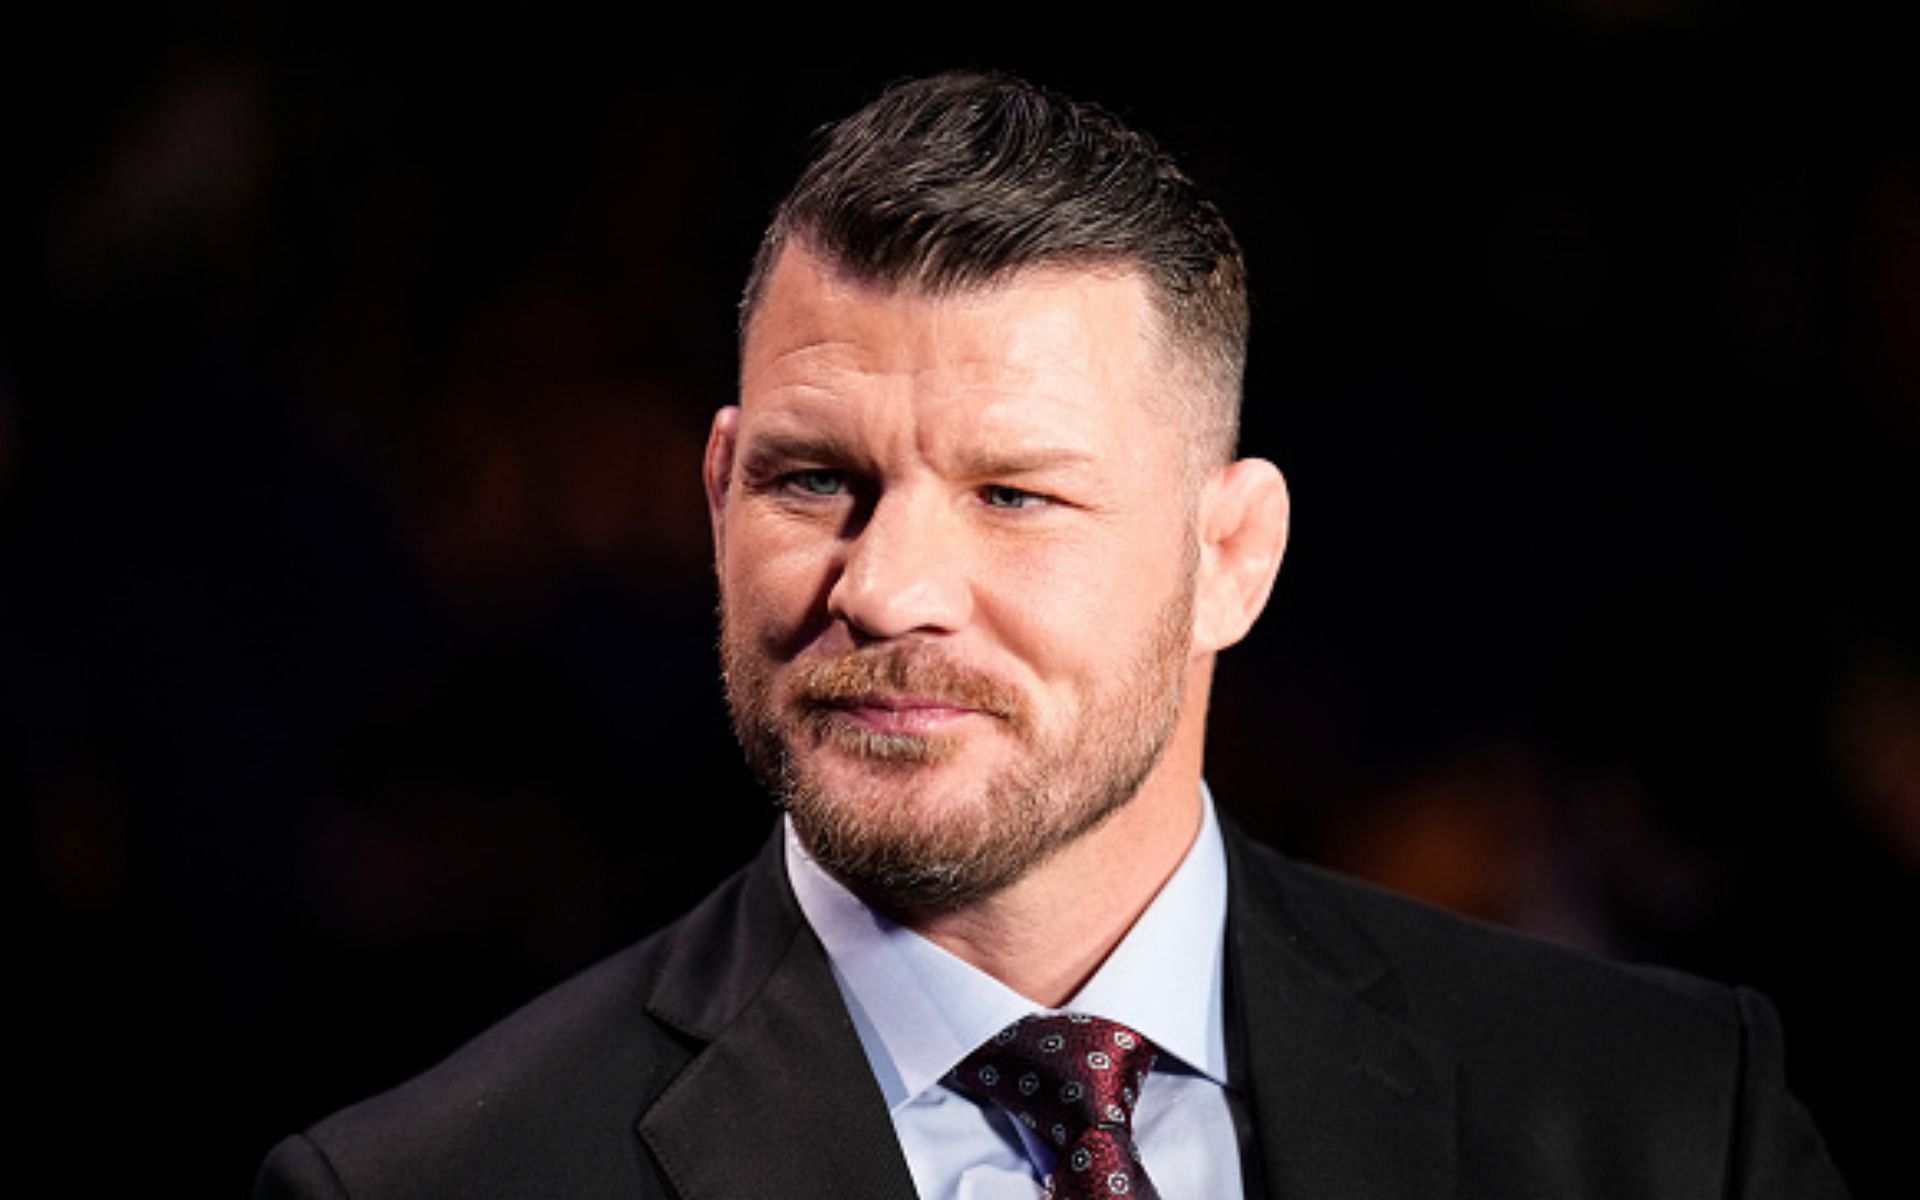 Michael Bisping was on commentary duty at UFC 275 in Singapore